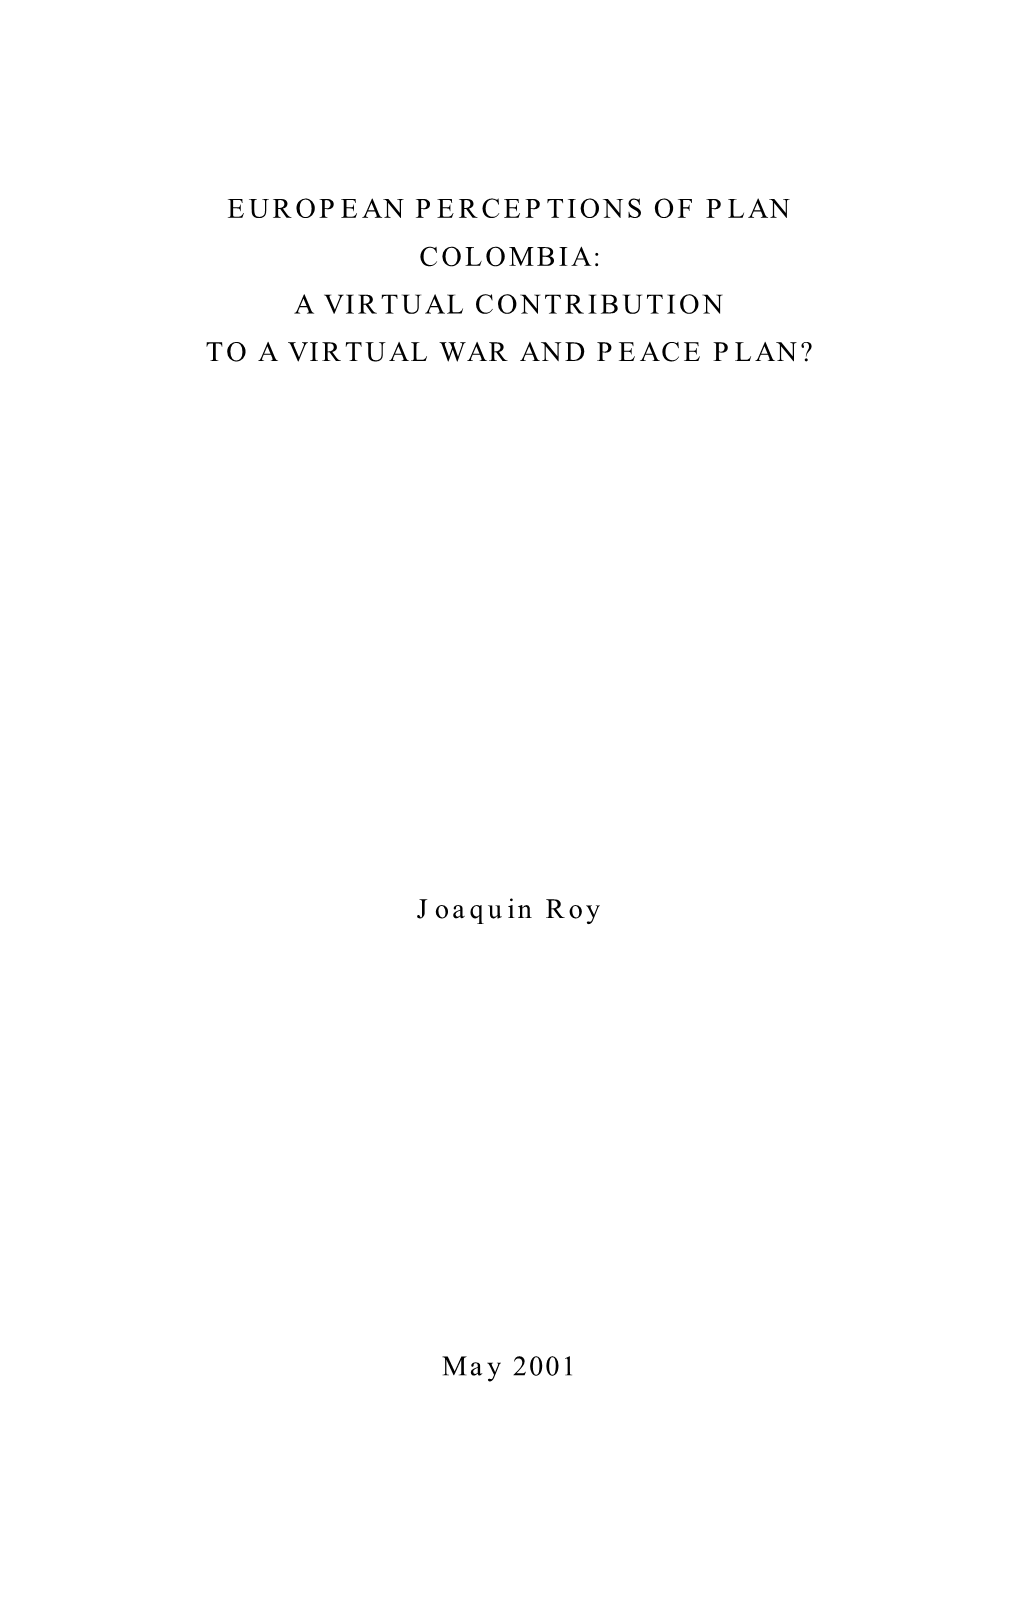 European Perceptions of Plan Colombia: a Virtual Contribution to a Virtual War and Peace Plan?